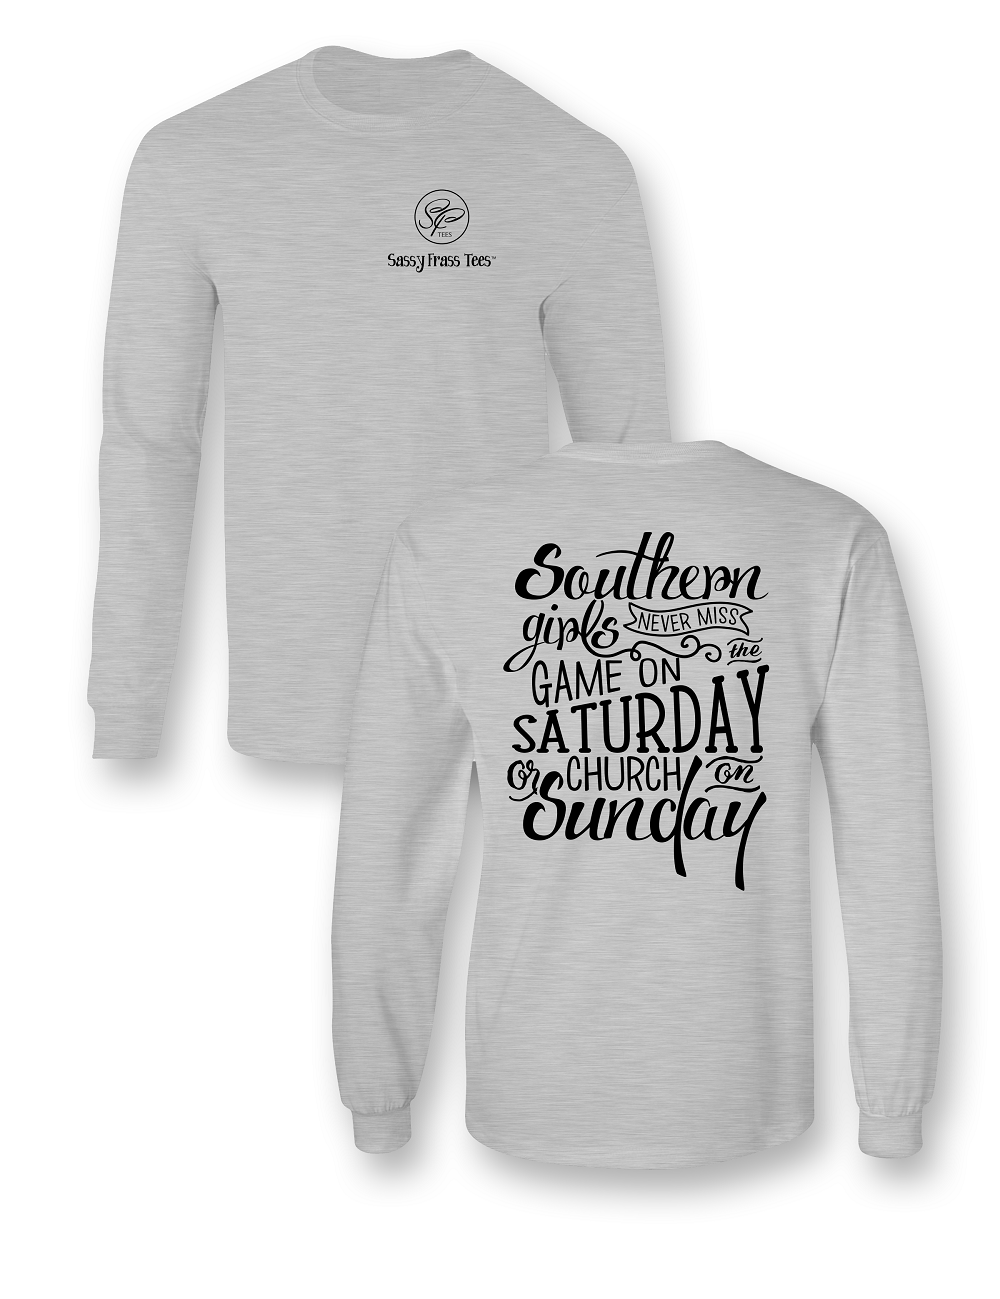 Sassy Frass Southern Girls Game on Saturday Church on Sunday Long Sleeve Bright Girlie T Shirt